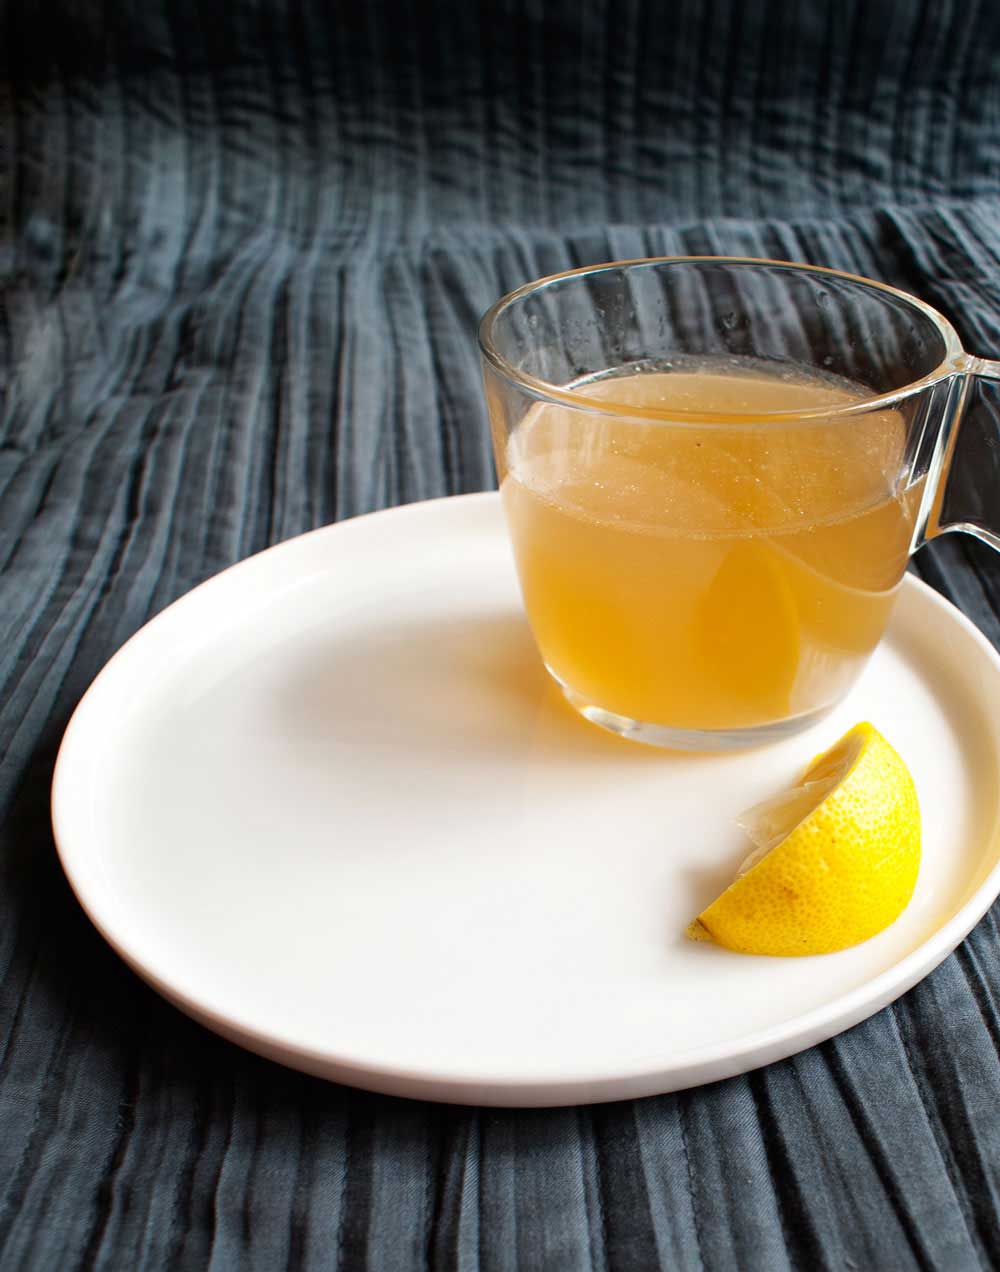 Ginger Tea. A flavourful tea made with ginger, honey and lemon. Great for upset stomachs.